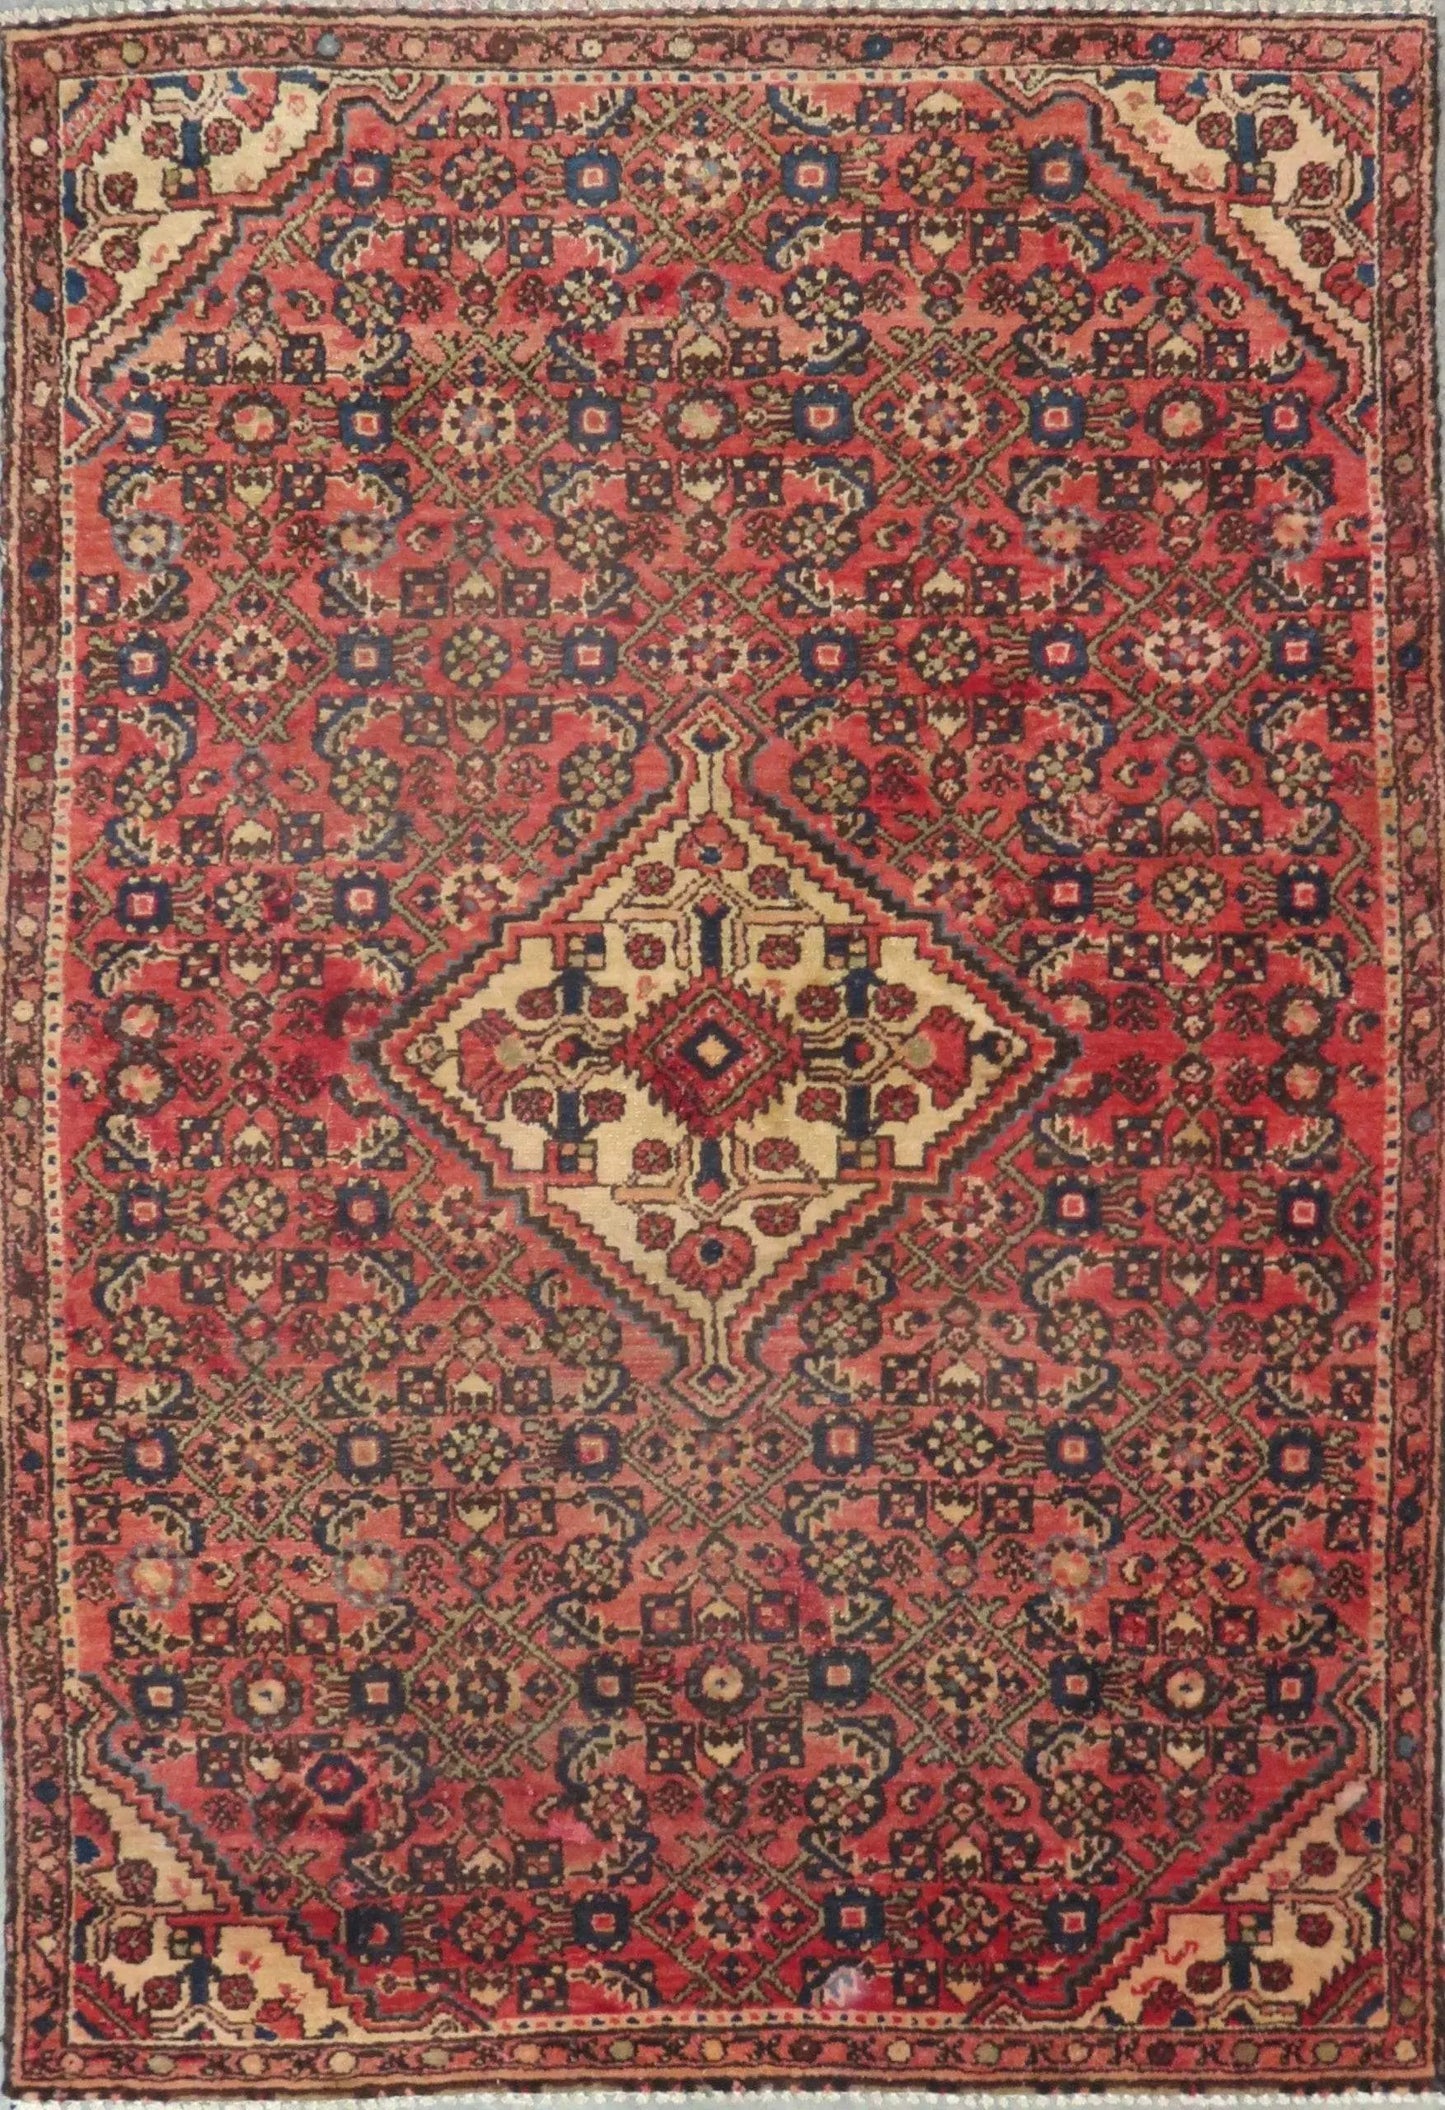 Hand-Knotted Persian Wool Rug _ Luxurious Vintage Design, 5'5" x 3'9", Artisan Crafted